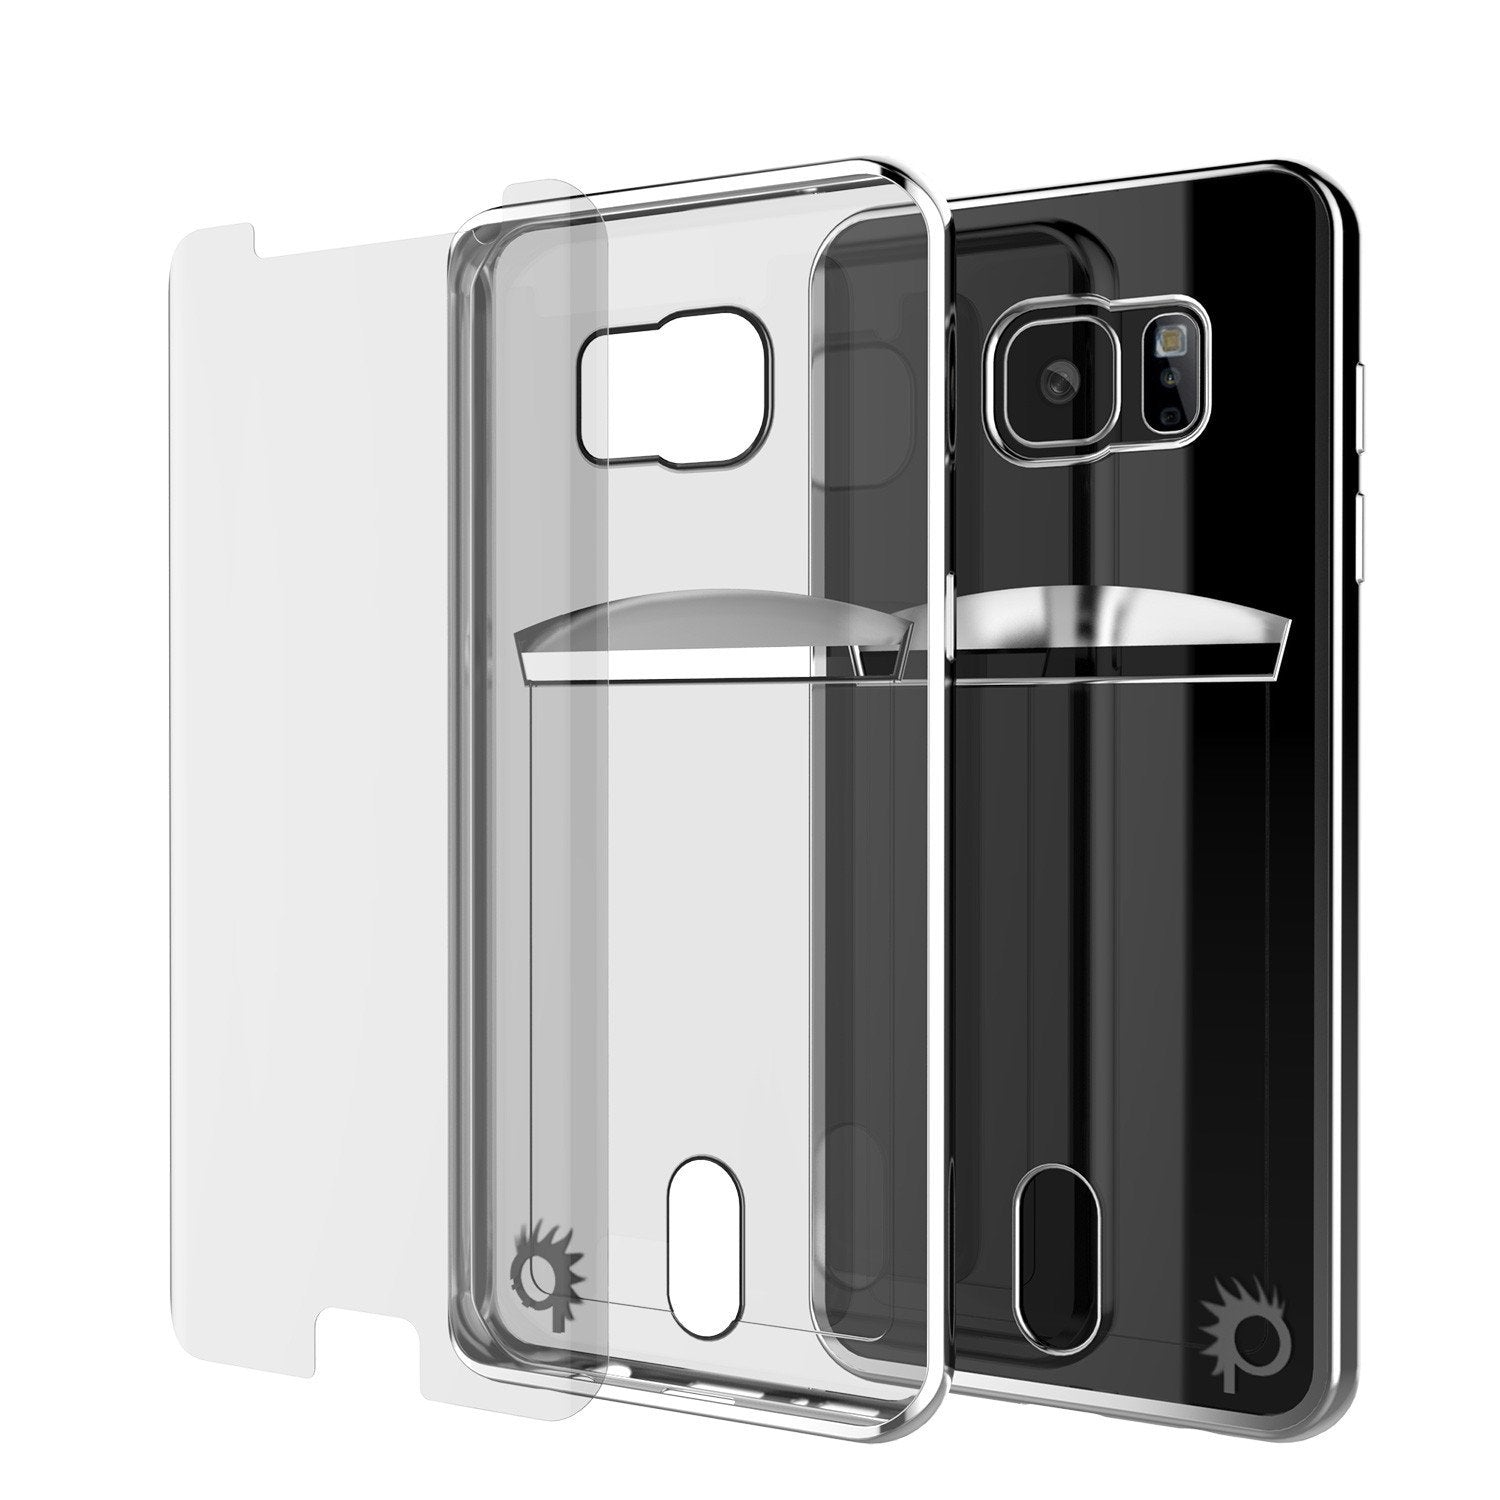 Galaxy S7 Case, PUNKCASE® LUCID Silver Series | Card Slot | SHIELD Screen Protector | Ultra fit - PunkCase NZ